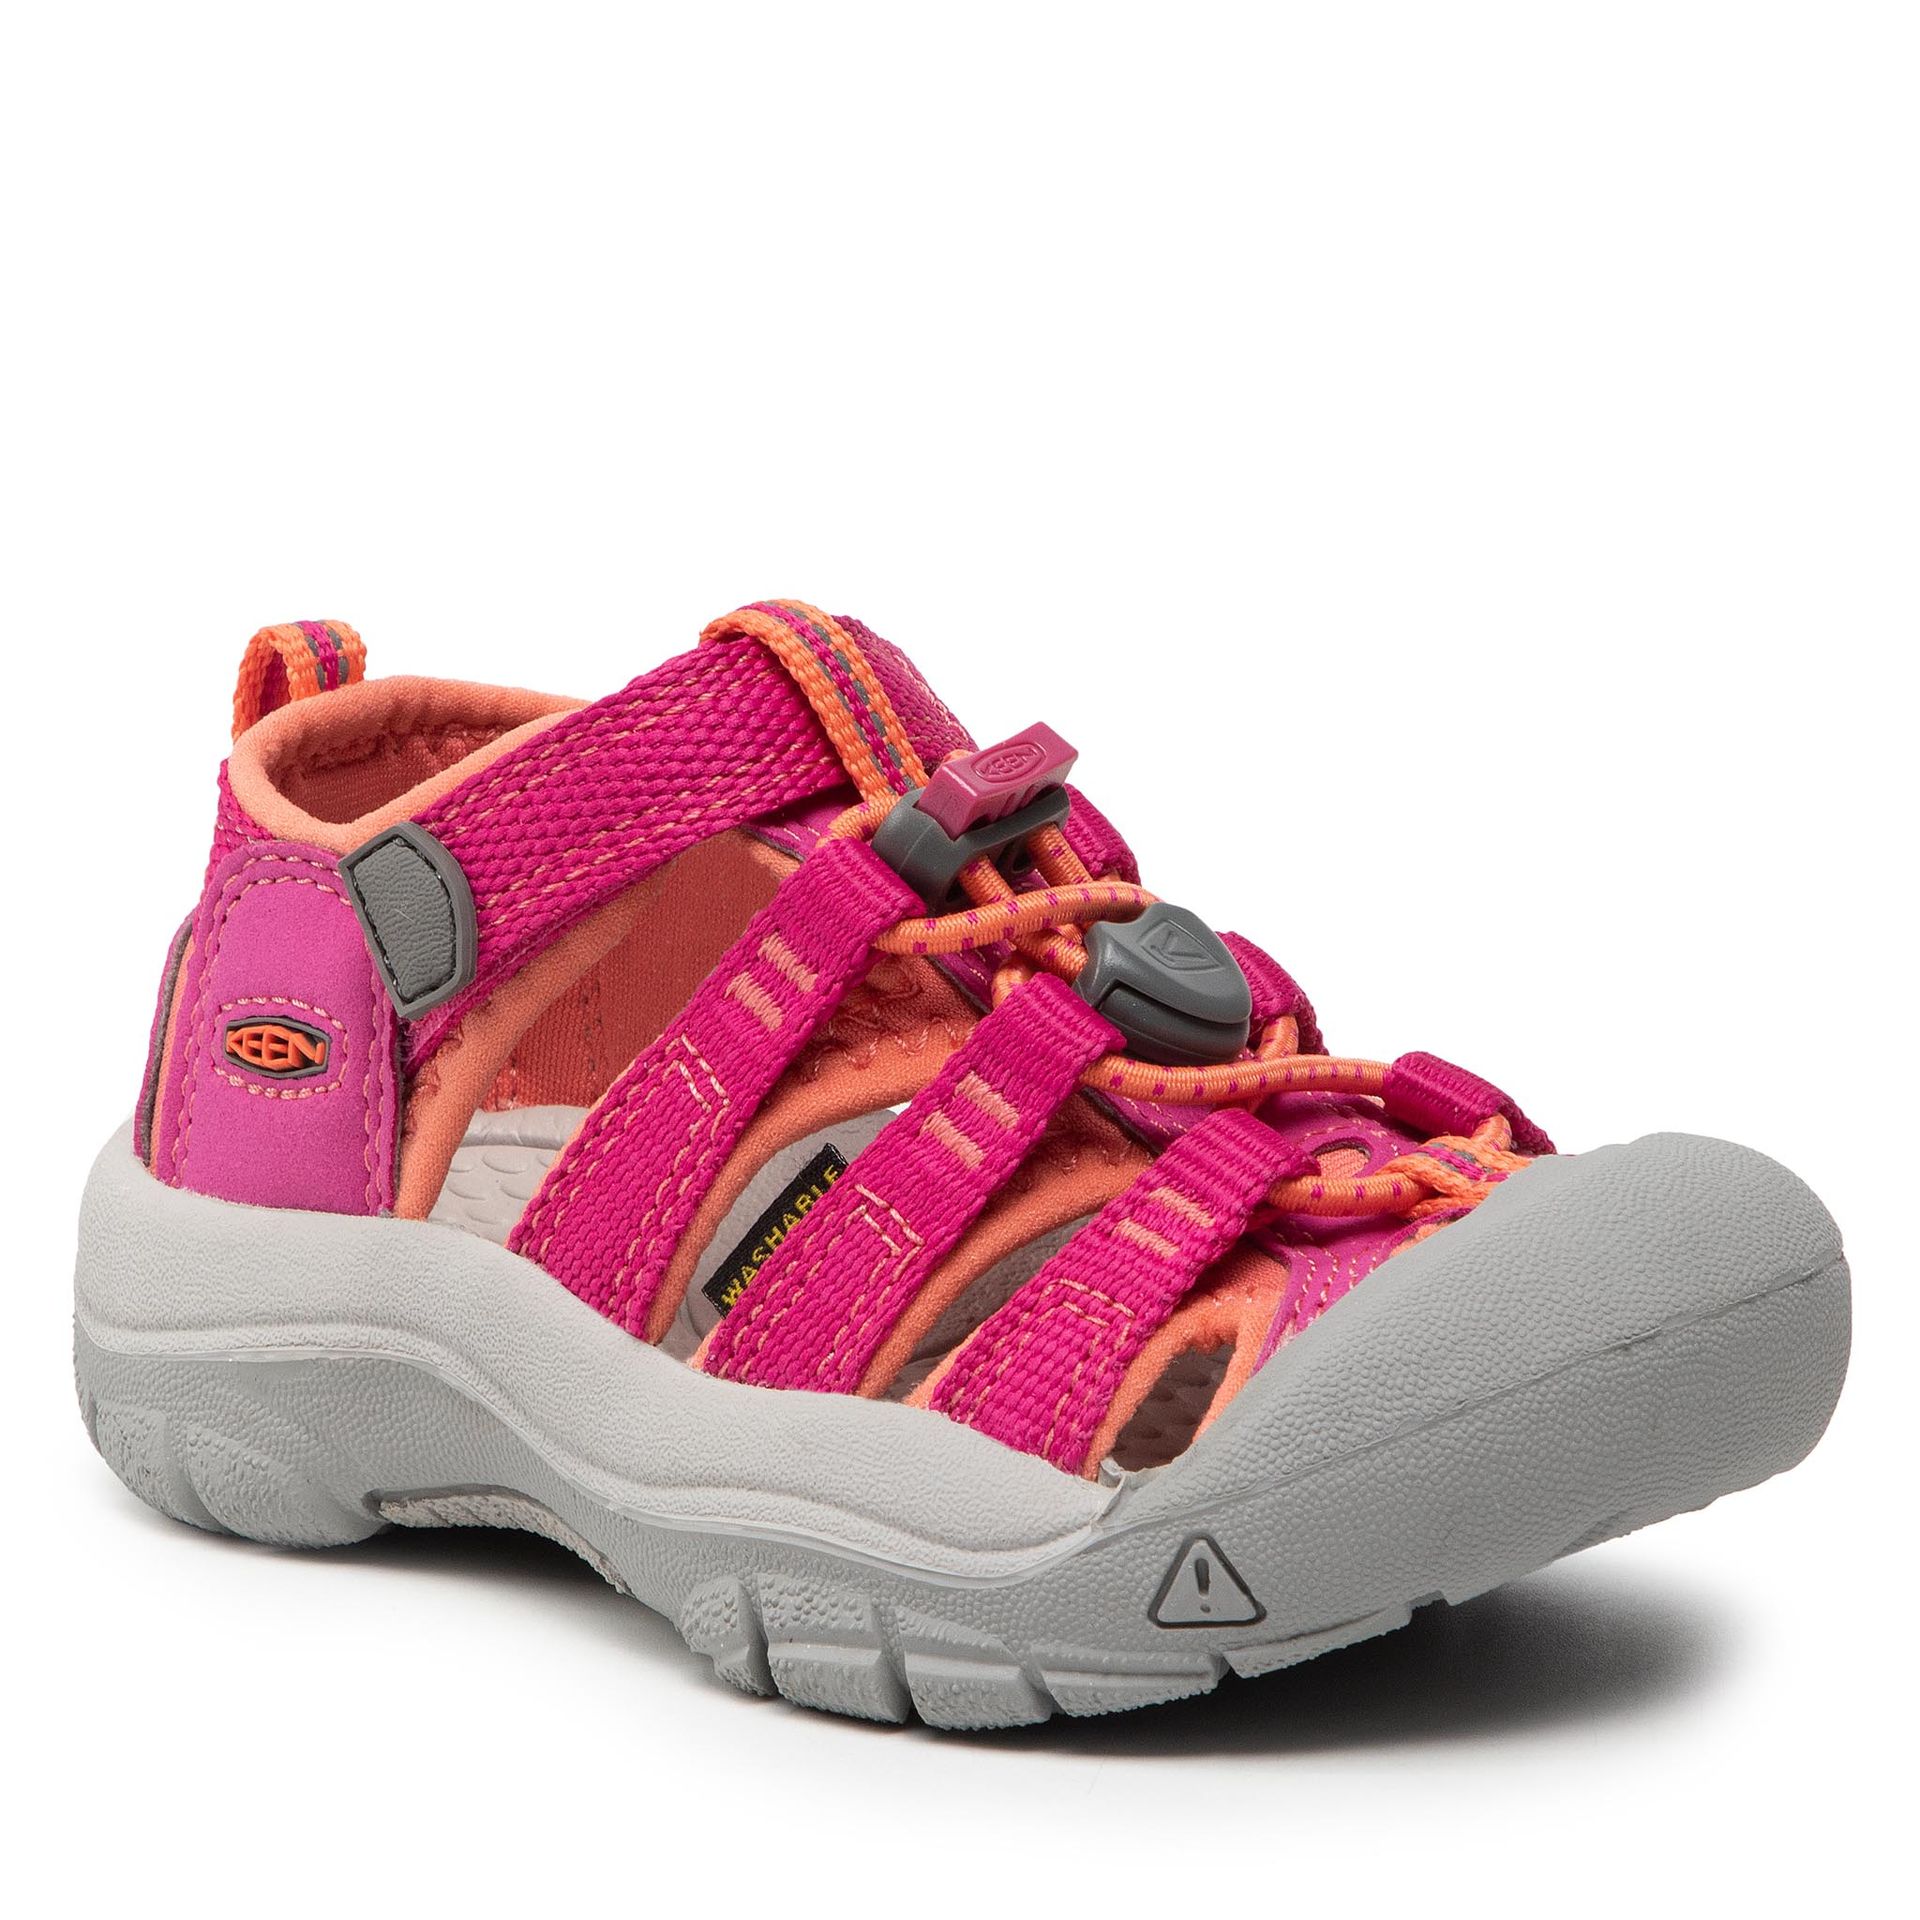 Keen Sandały Newport H2 1014251 Verry Berry/Fusion Coral